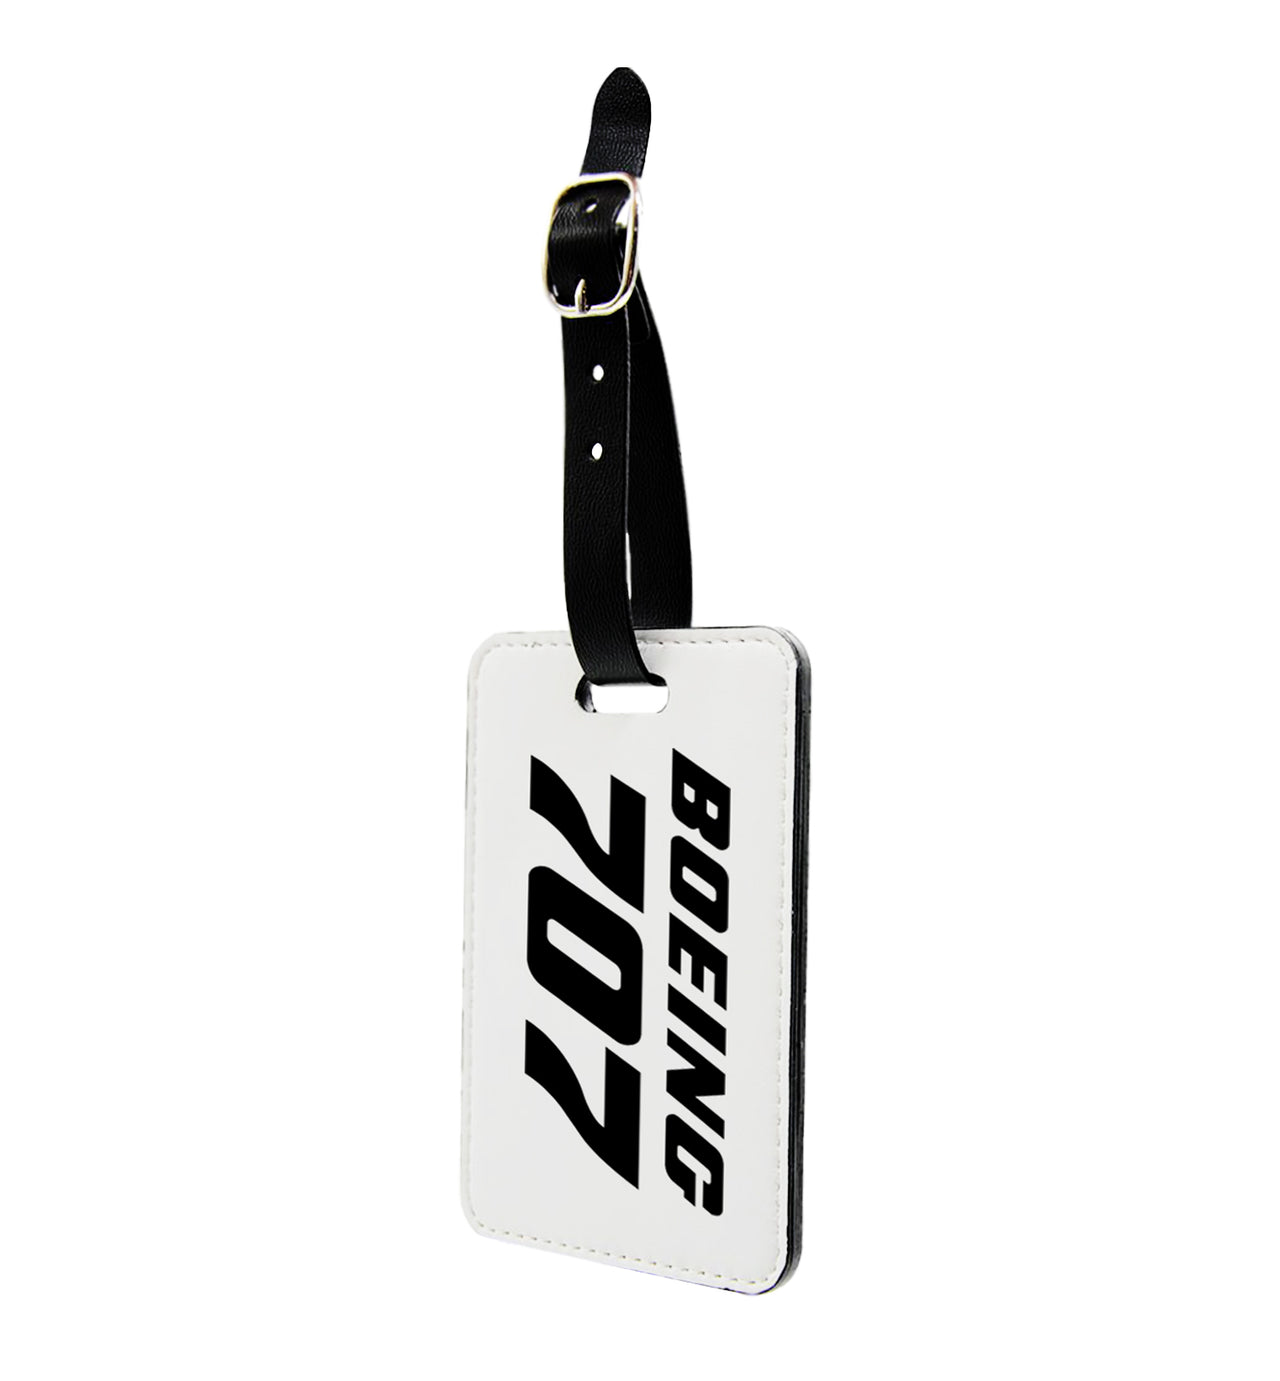 Boeing 707 & Text Designed Luggage Tag